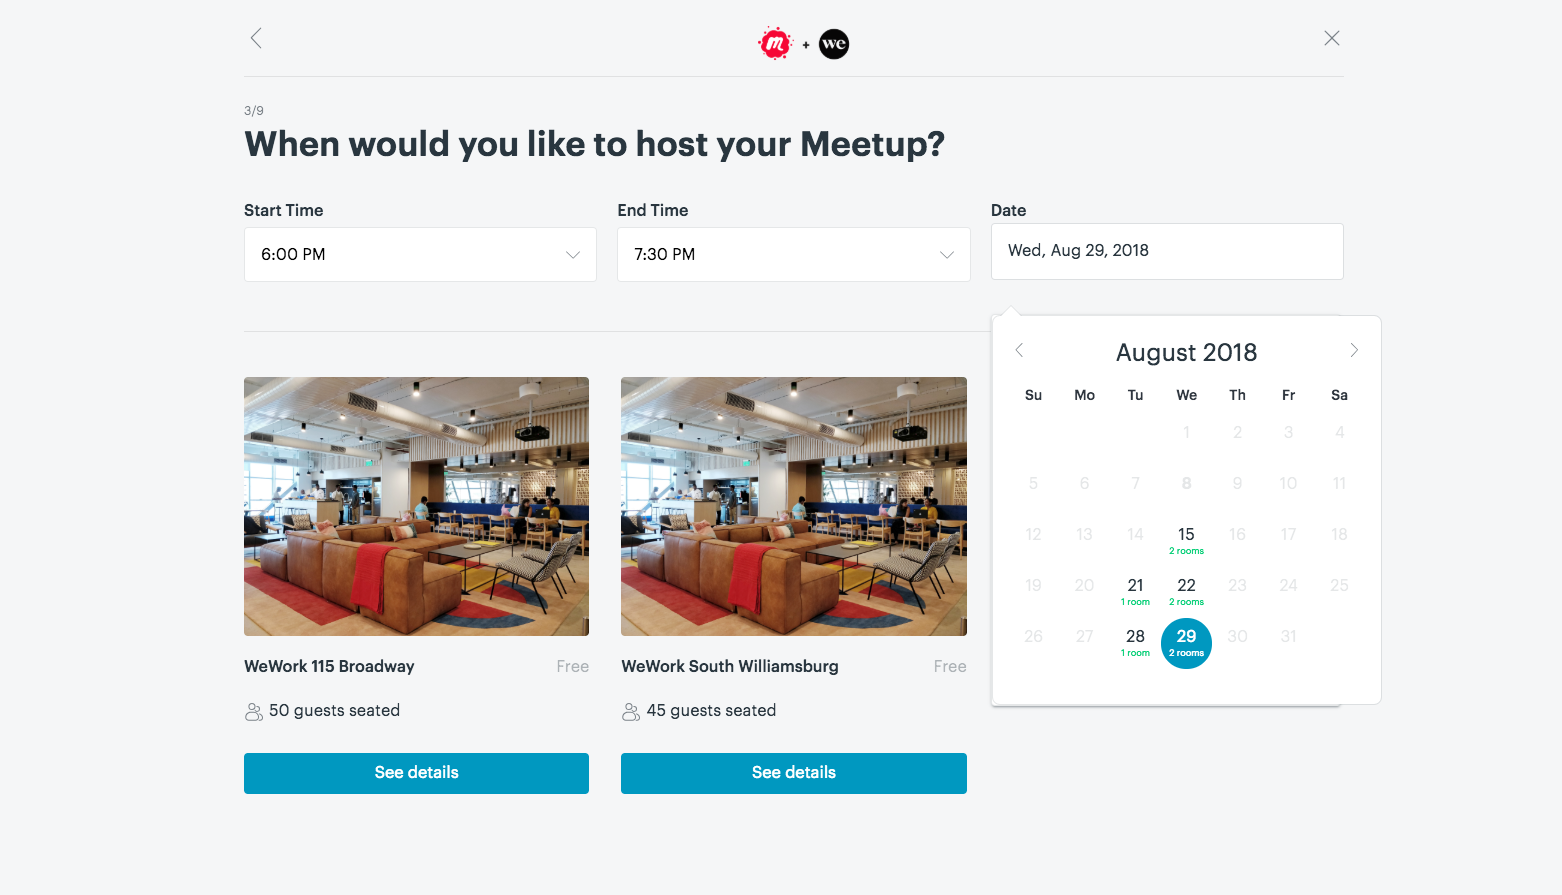 One of the first organizer tools I contributed to at Meetup as a Full Stack Engineer was the Meetups at WeWork instant reservation system which enabled eligible organizers to instantly reserve venue space at WeWork locations globally on the Meetup website.